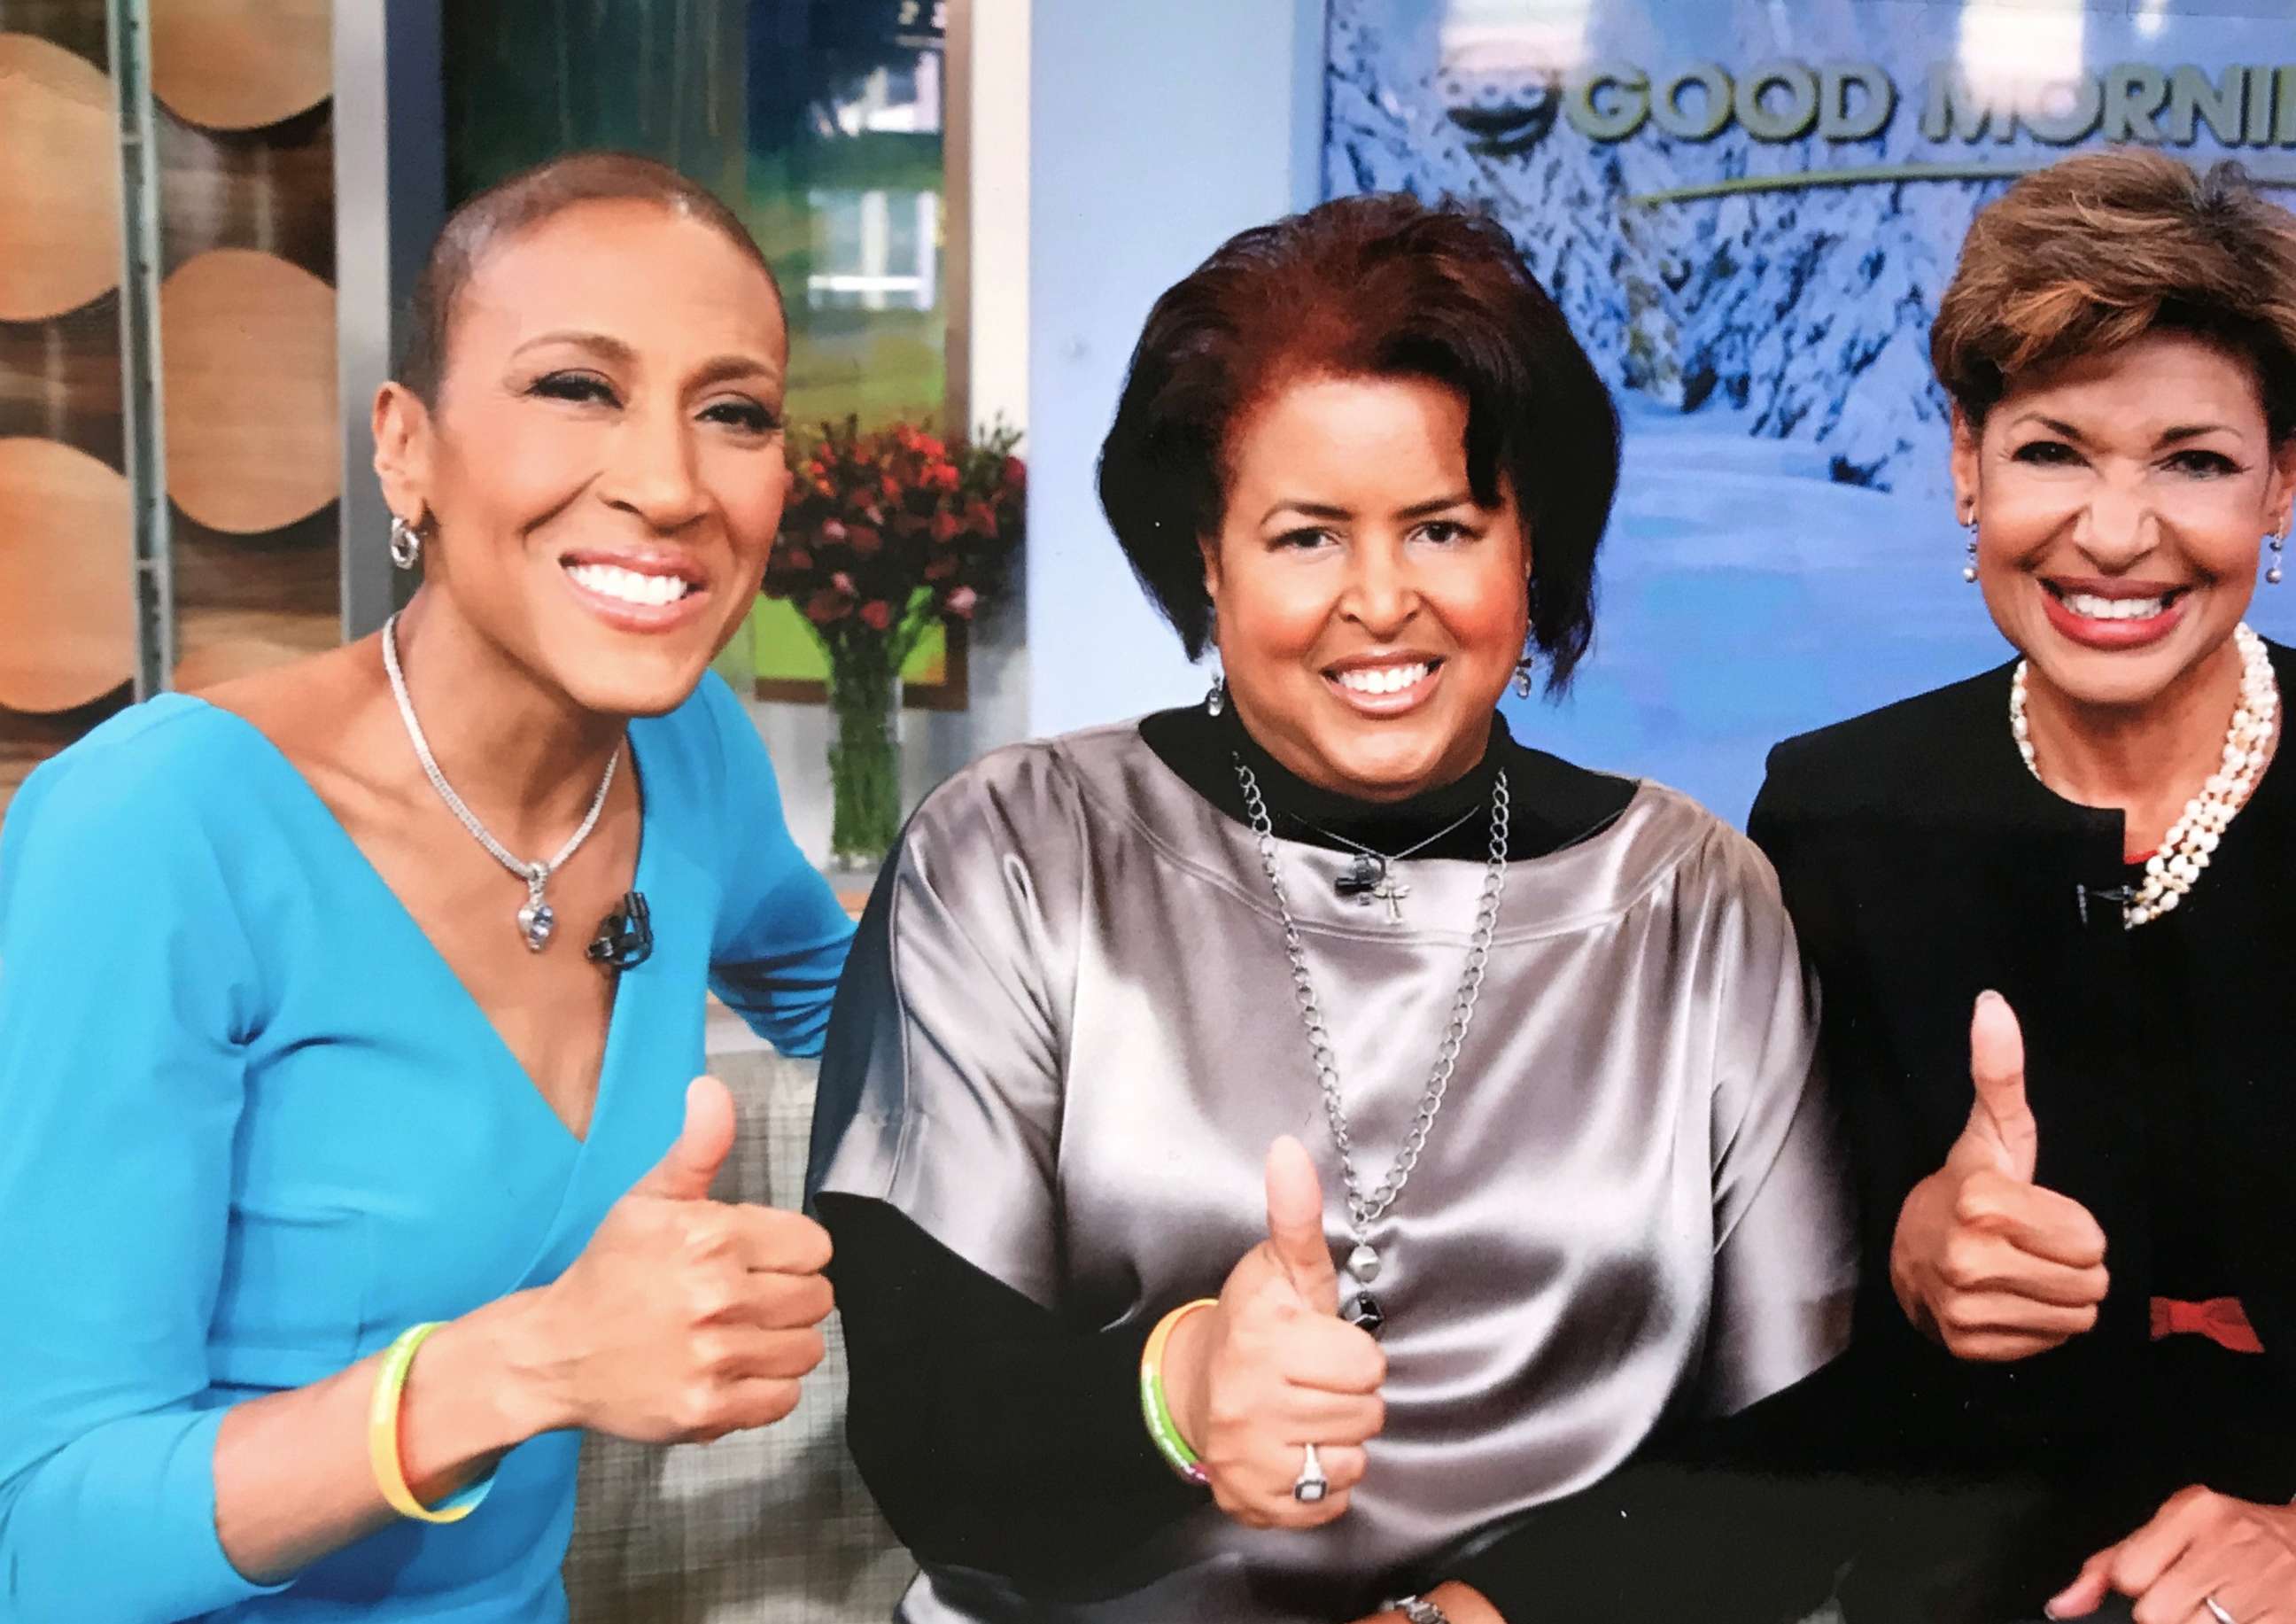 PHOTO: ABC News' Robin Roberts and her sisters are pictured on the "Good Morning America" set on Feb. 20, 2013.